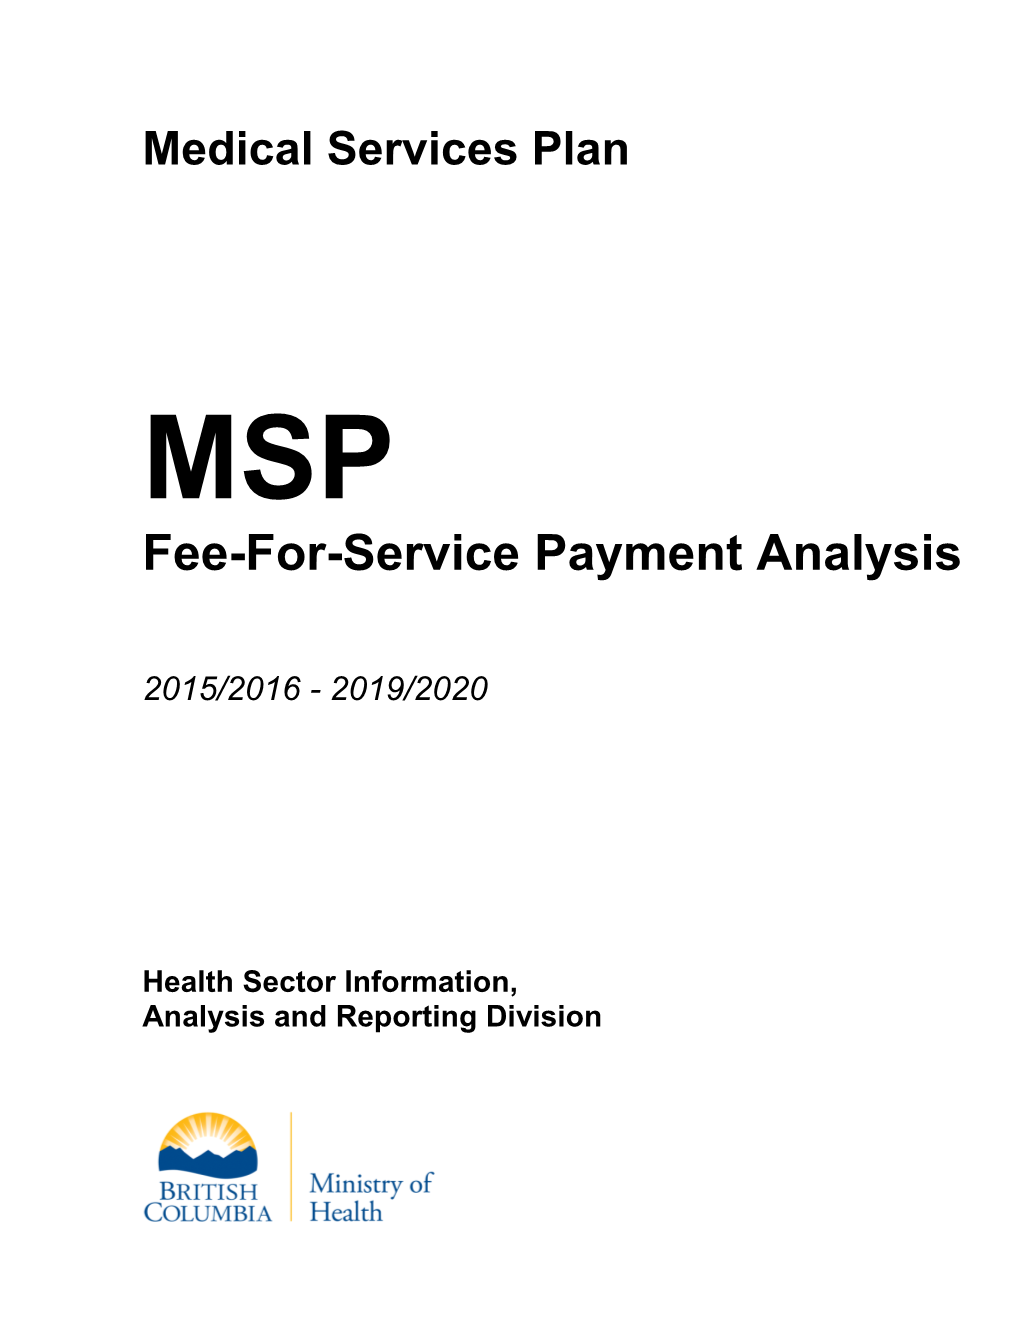 Fee-For-Service Payment Analysis